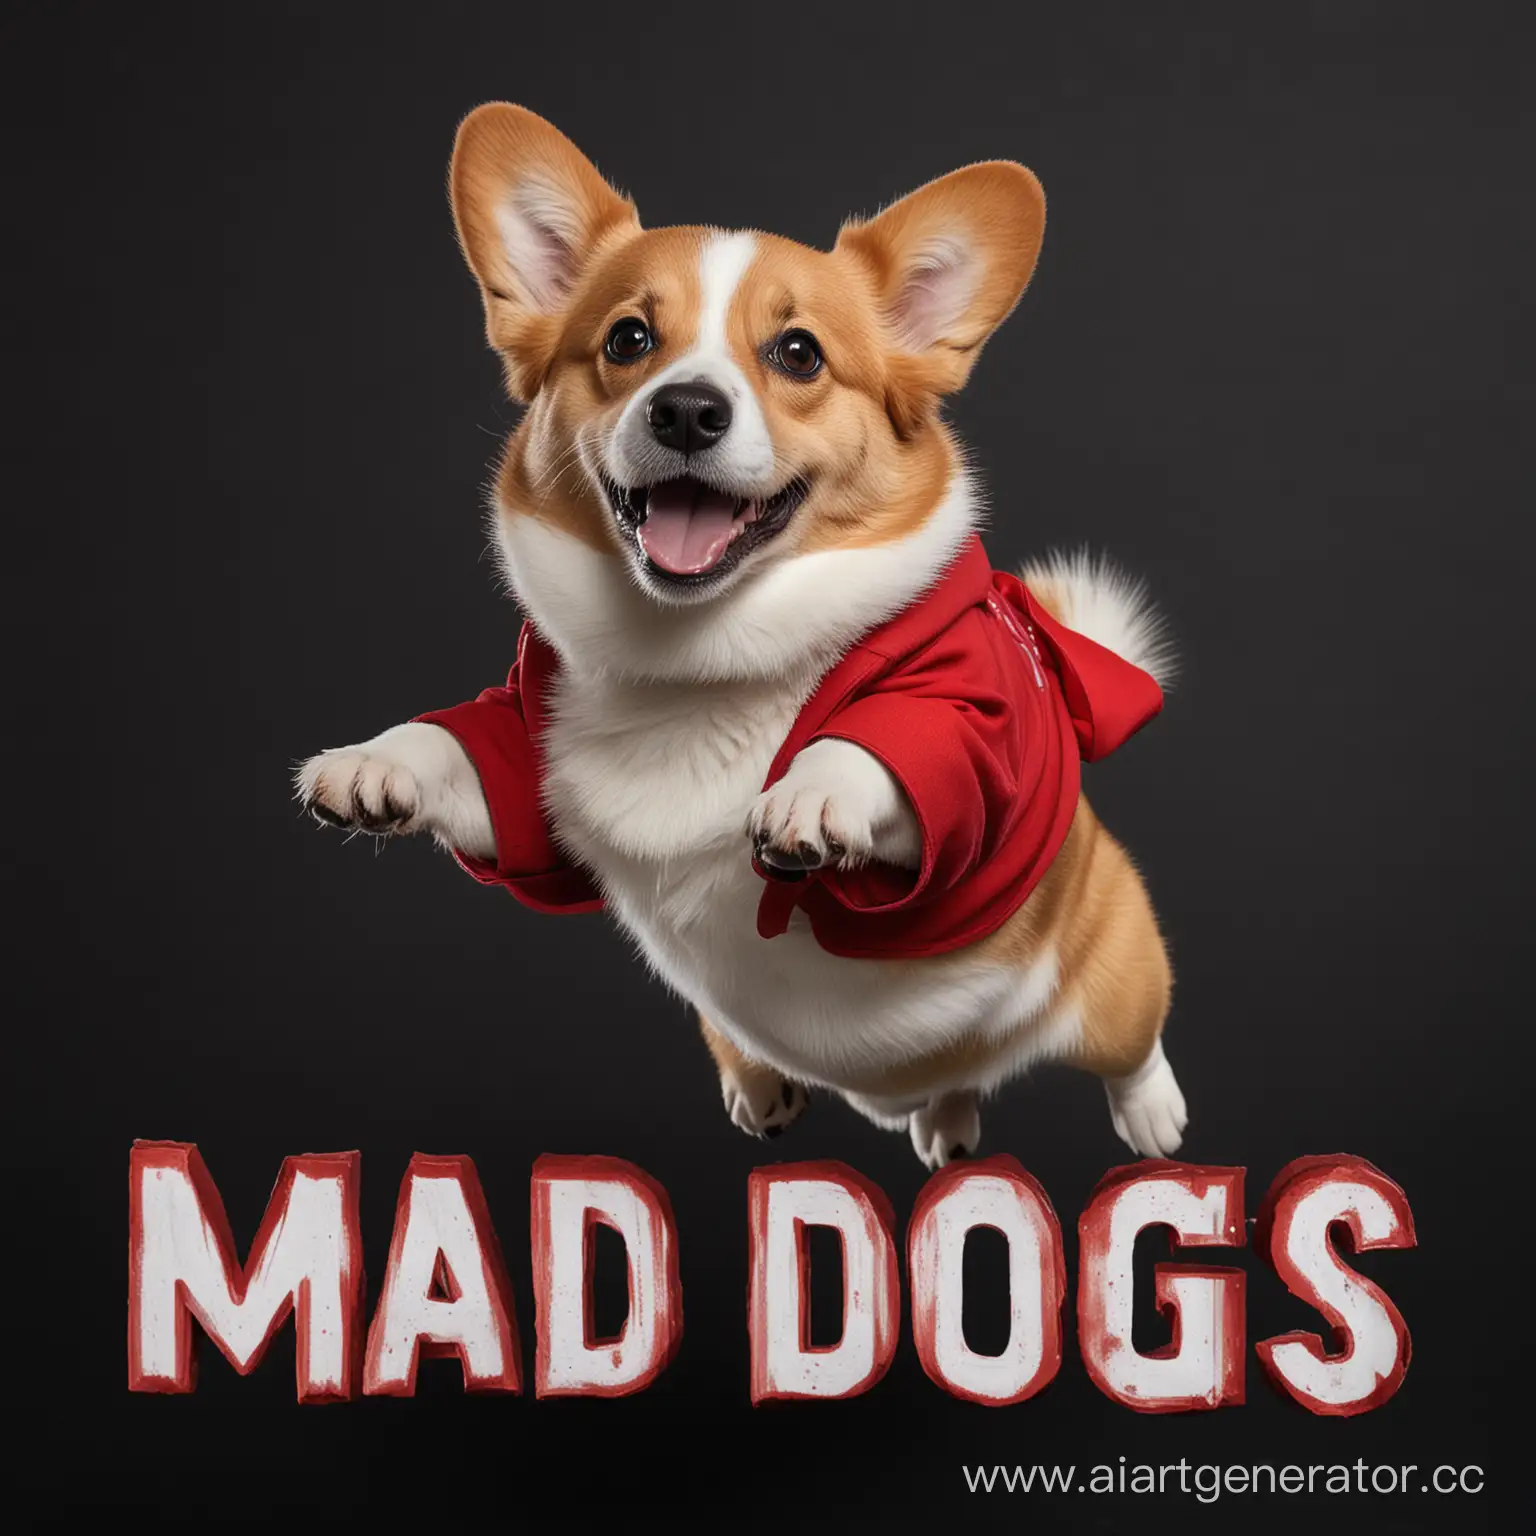 Energetic-RedCoated-Corgi-Leaping-with-Mad-Dogs-Inscription-on-Black-Background